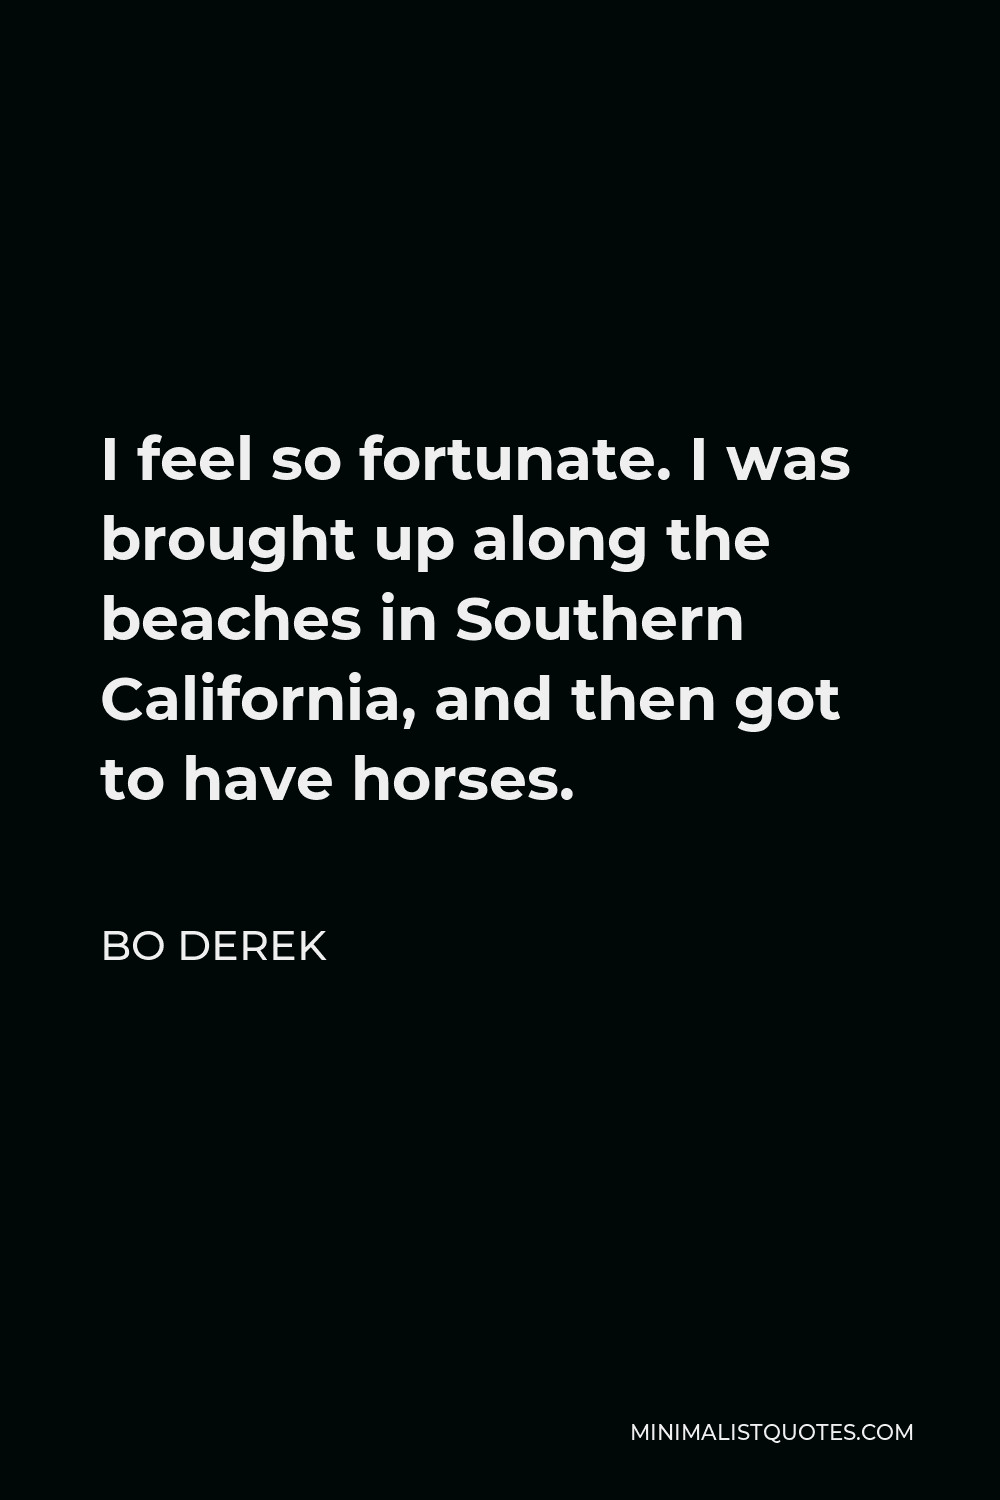 Bo Derek Quote - I feel so fortunate. I was brought up along the beaches in Southern California, and then got to have horses.